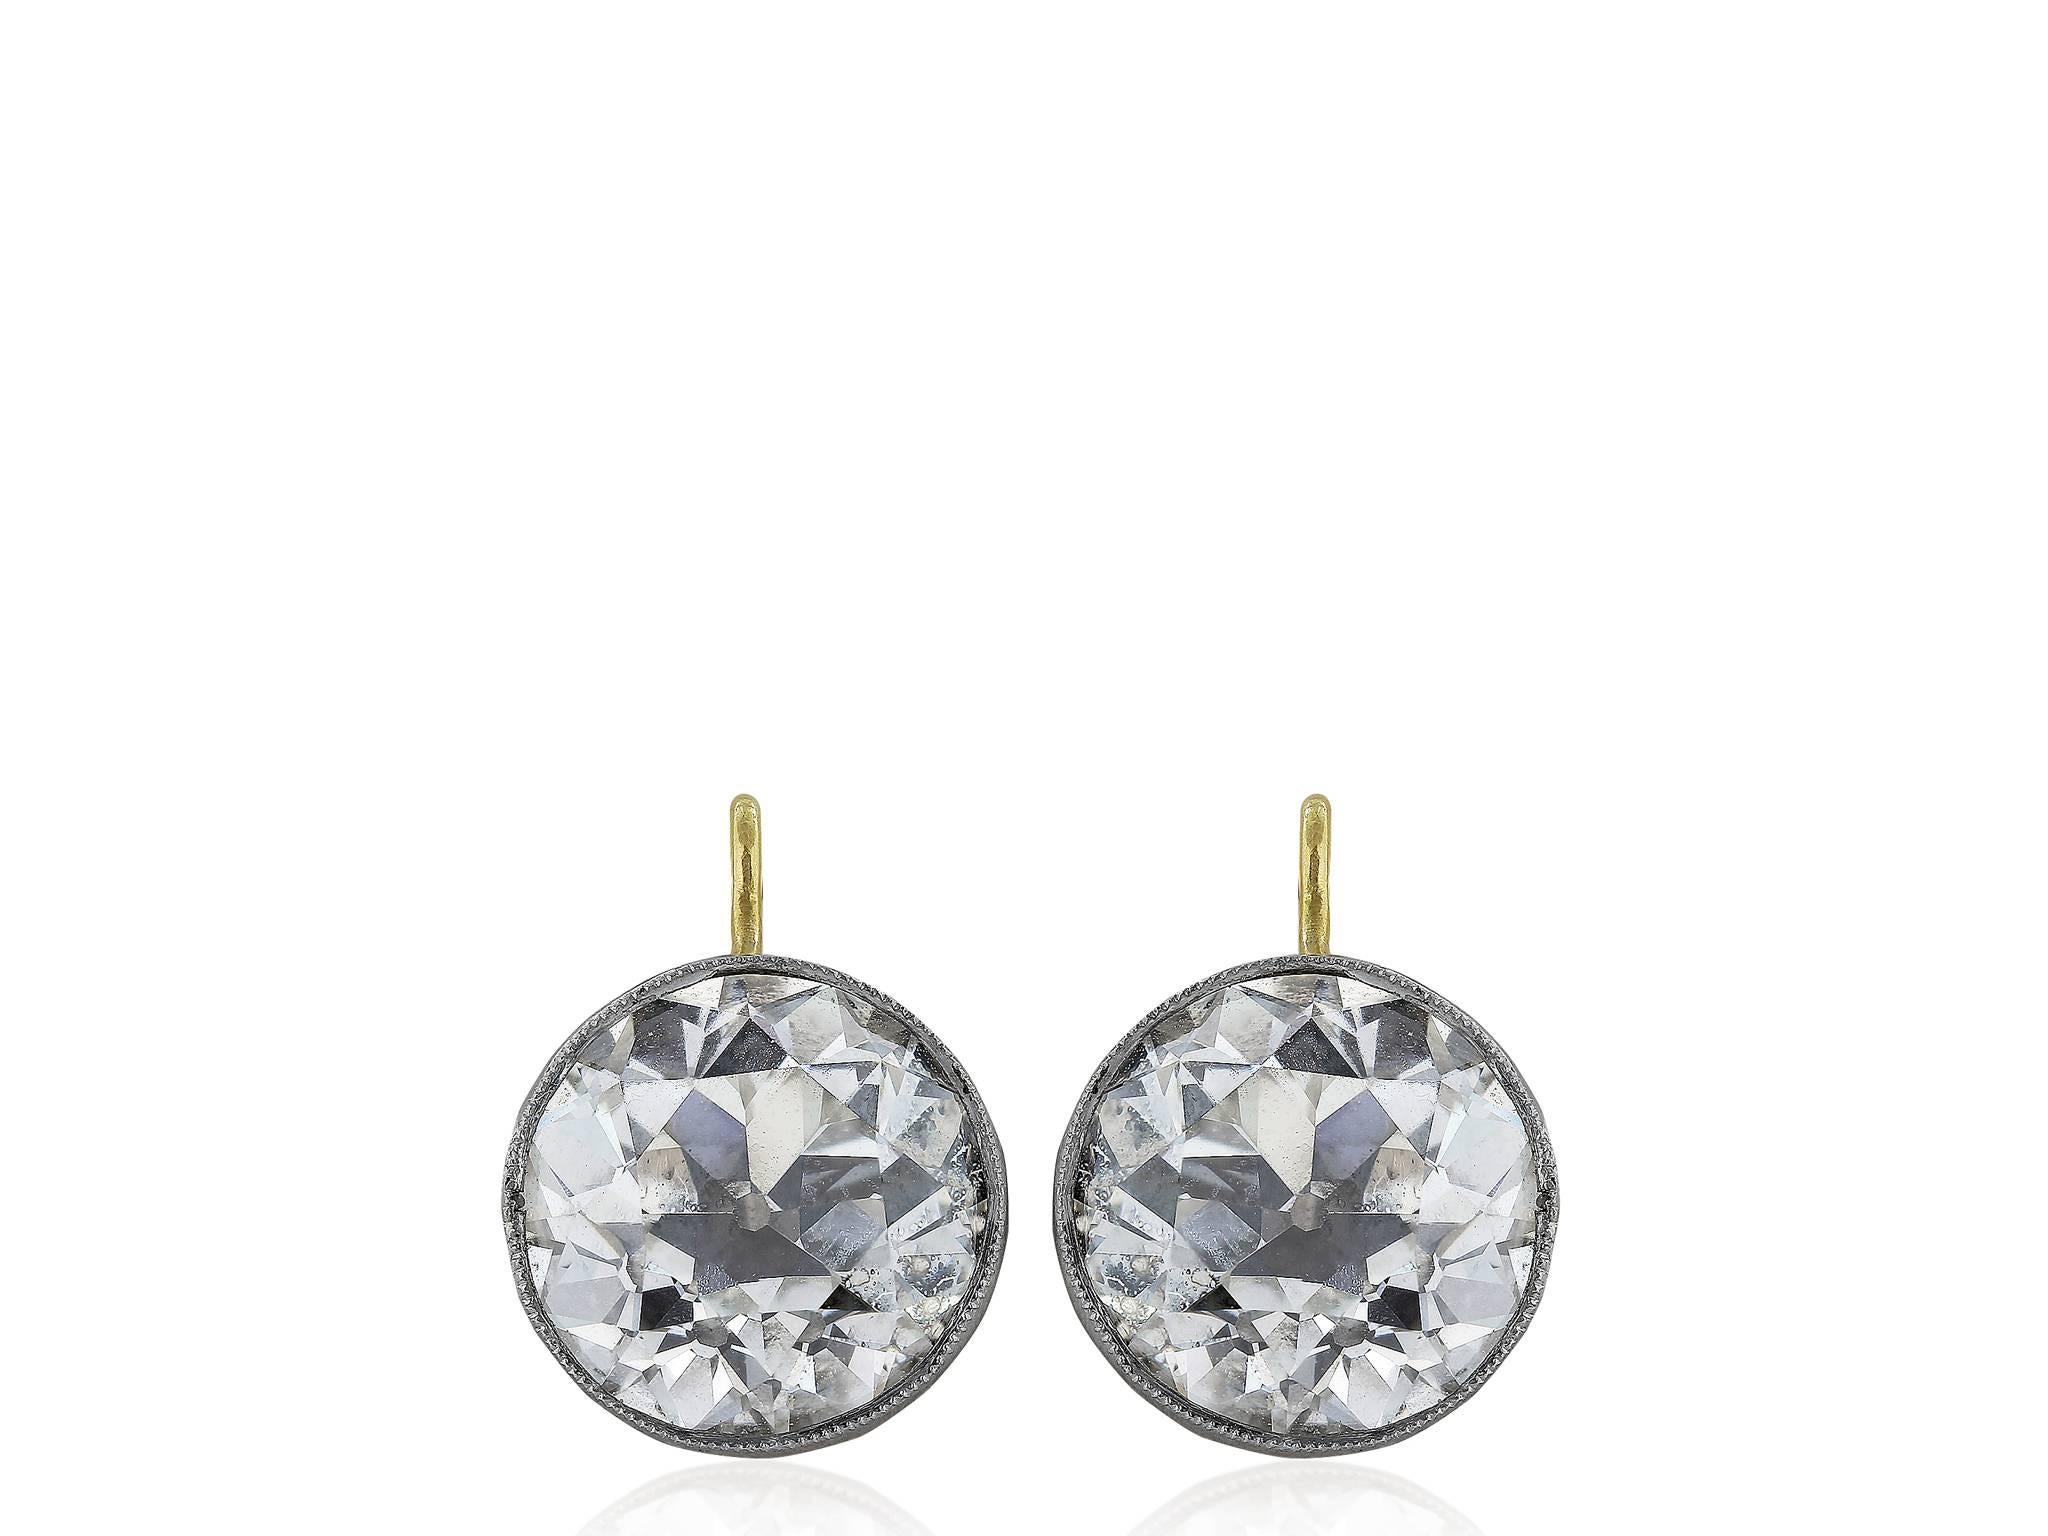 Platinum and 18 karat yellow gold vintage style drop earrings consisting of 1 Old European cut diamond weighing 3.06 carats having a color and clarity of J/VS2 with GIA certificate #1162042994 and 1 Old European cut diamond weighing 3.05 carats